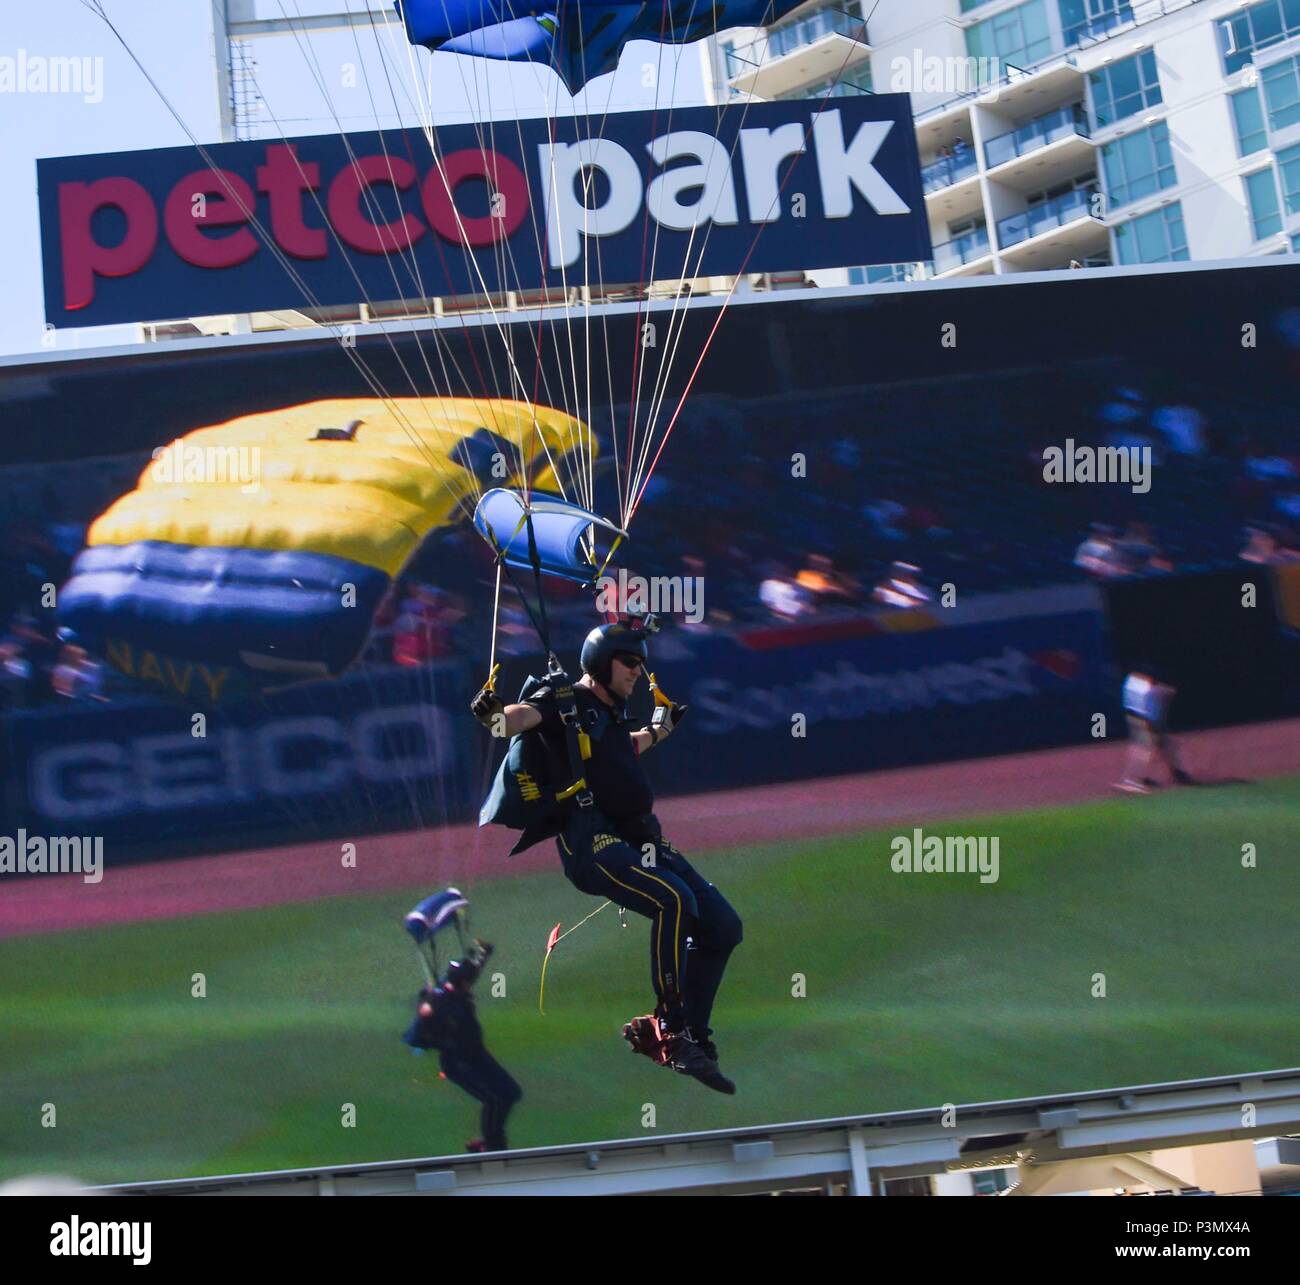 160710-N-VY375-079  SAN DIEGO (July 10, 2016) Retired U.S. Navy SEAL Jim Woods, member of the U.S. Navy Parachute Team, the Leap Frogs, comes in for a landing during a demonstration at the Major League Baseball All-Star Futures Game above Petco Park. The Navy Parachute Team is based in San Diego and performs aerial parachute demonstrations around the nation in support of Naval Special Warfare and Navy recruiting. (U.S. Navy photo by Special Operator 1st Class Remington Peters/Released) Stock Photo